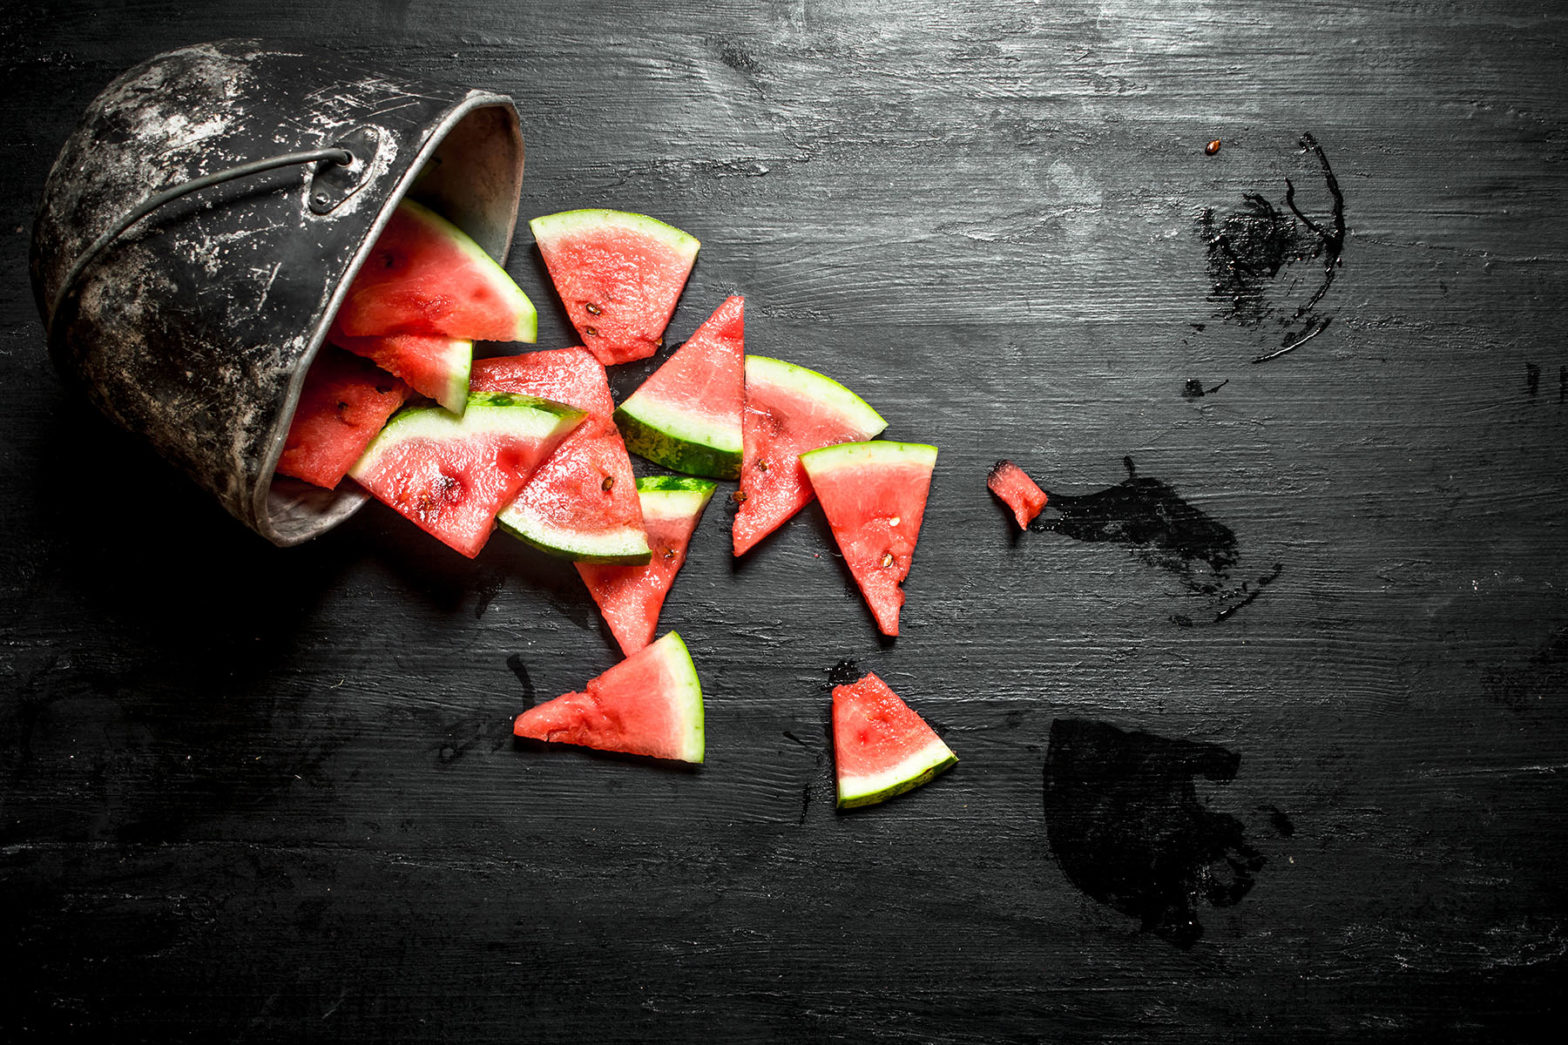 Chopped pieces of watermelon in an old pot. On the black wooden table.